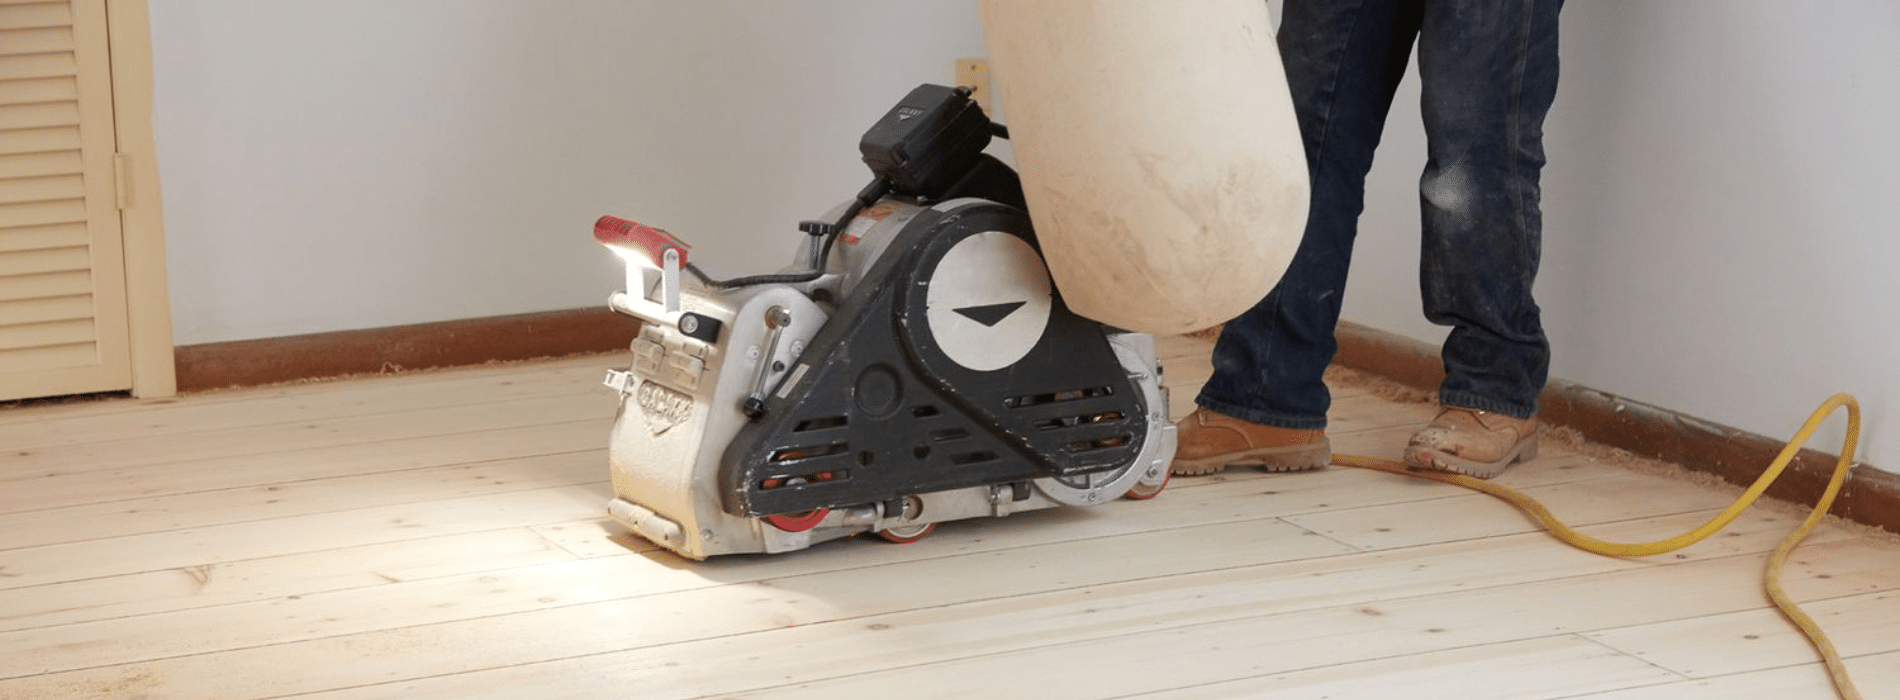 In Basildon, SS13, Mr Sander® skillfully sanding a herringbone floor using the powerful 2.2 kW Bona belt sander. The 220V, 60Hz machine, sized 200x750 mm, creates stunning results while the HEPA-filtered dust extraction system ensures cleanliness and efficiency.